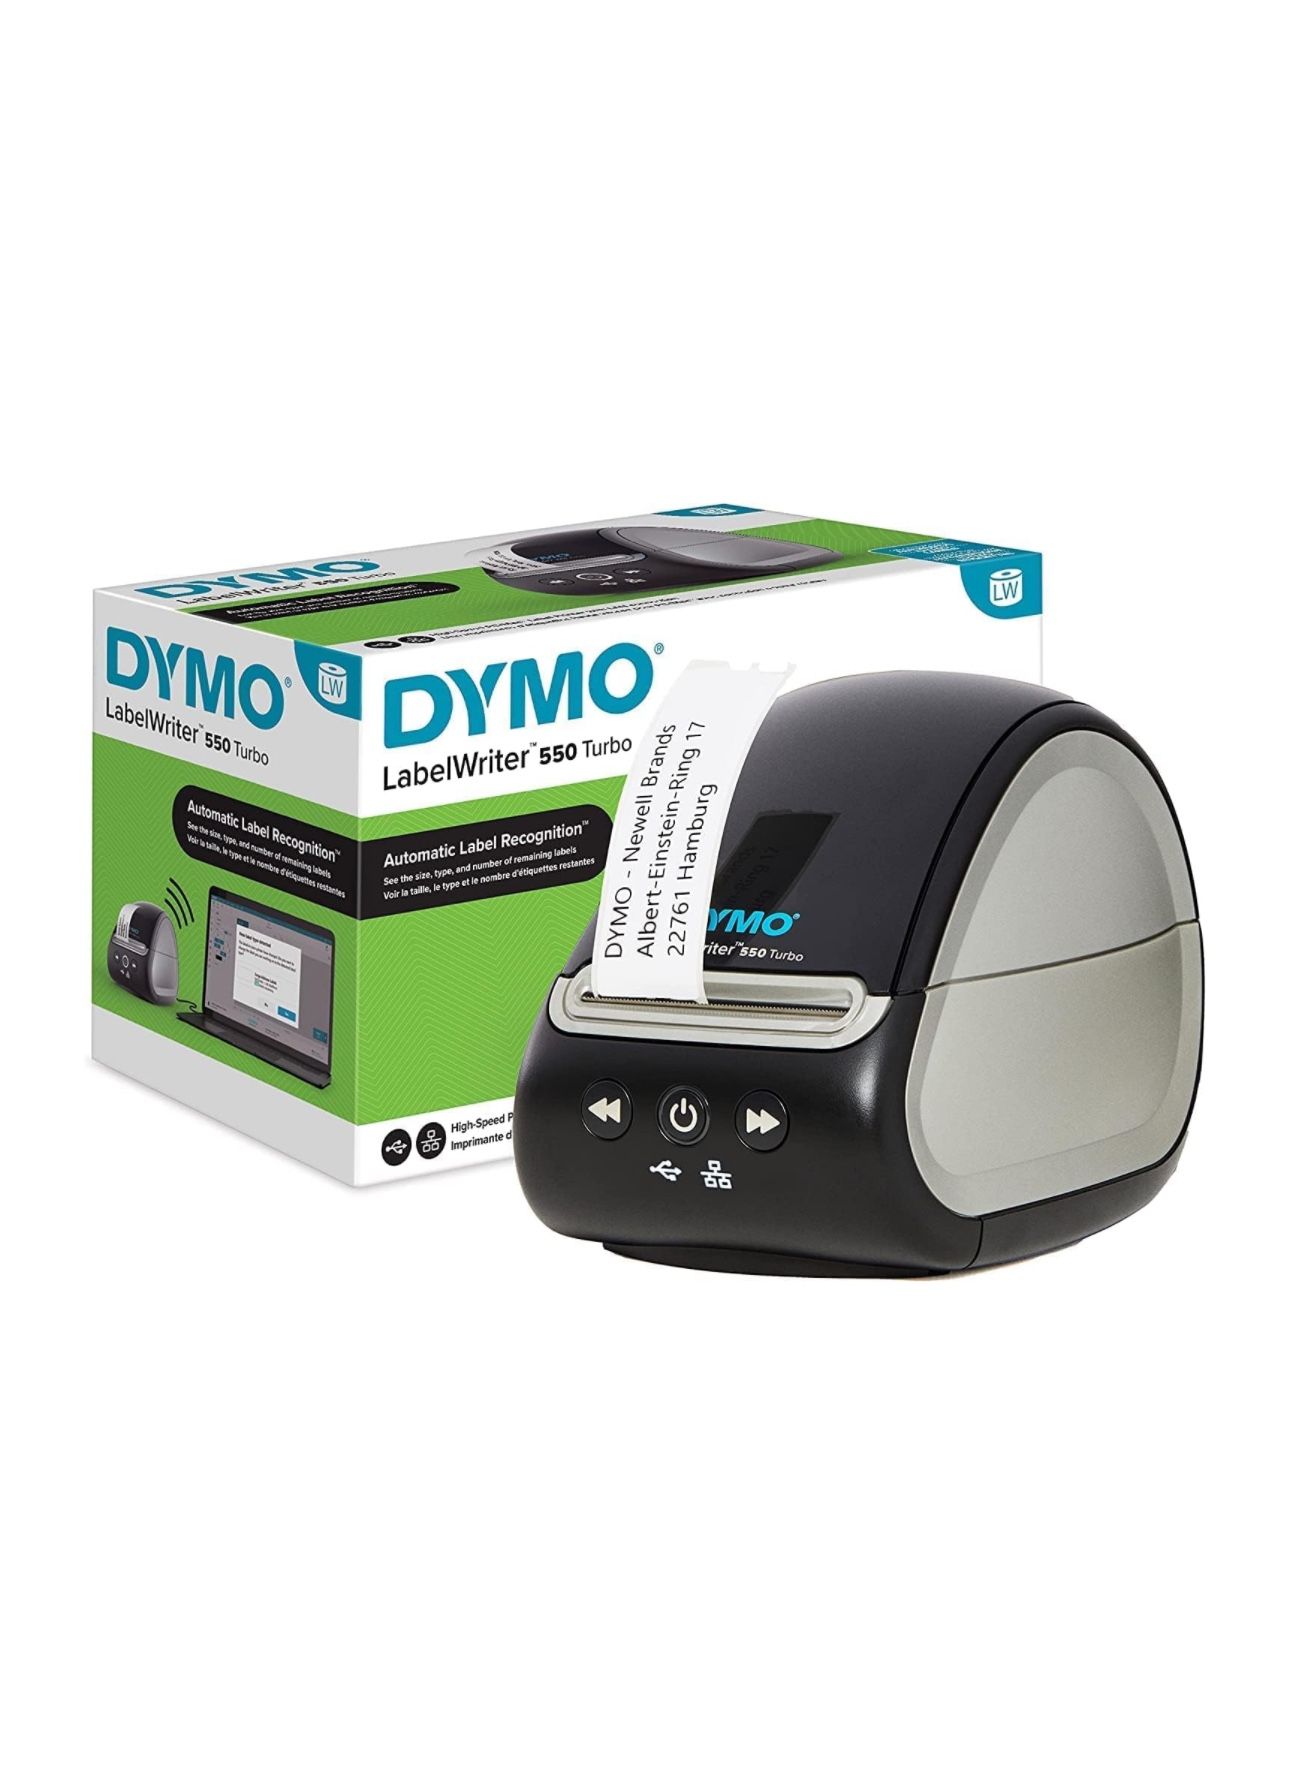 DYMO LabelWriter 550 Turbo Direct Thermal Label Maker - USB and LAN Connectivity - Print up to 90 Labels Per Minute, 300 dpi, Auto Label Recognition, 